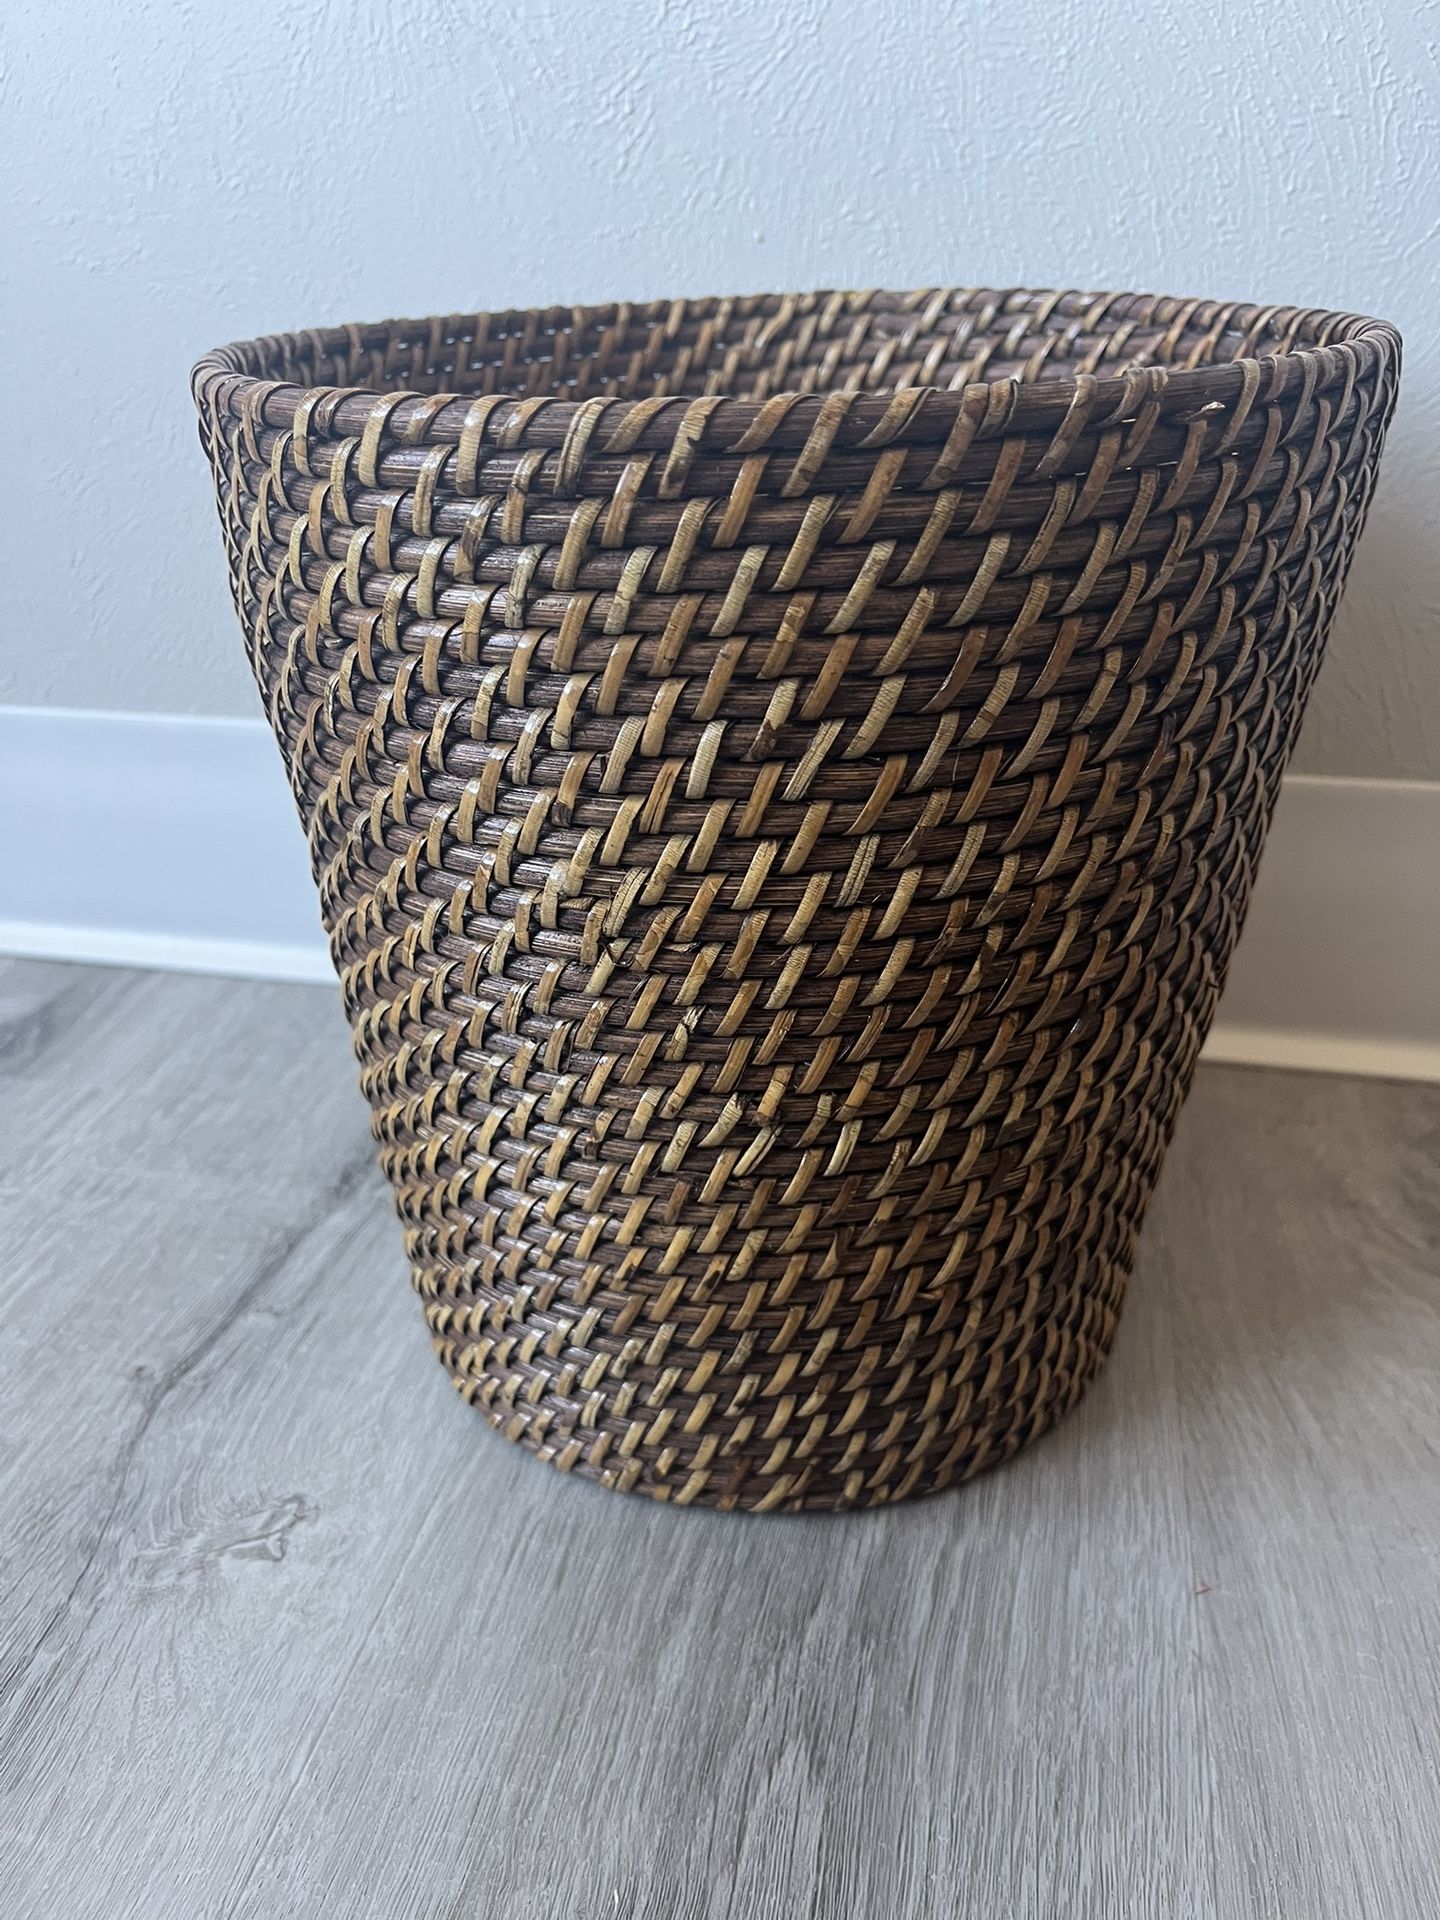 Woven Wicker And Wire Waste Basket